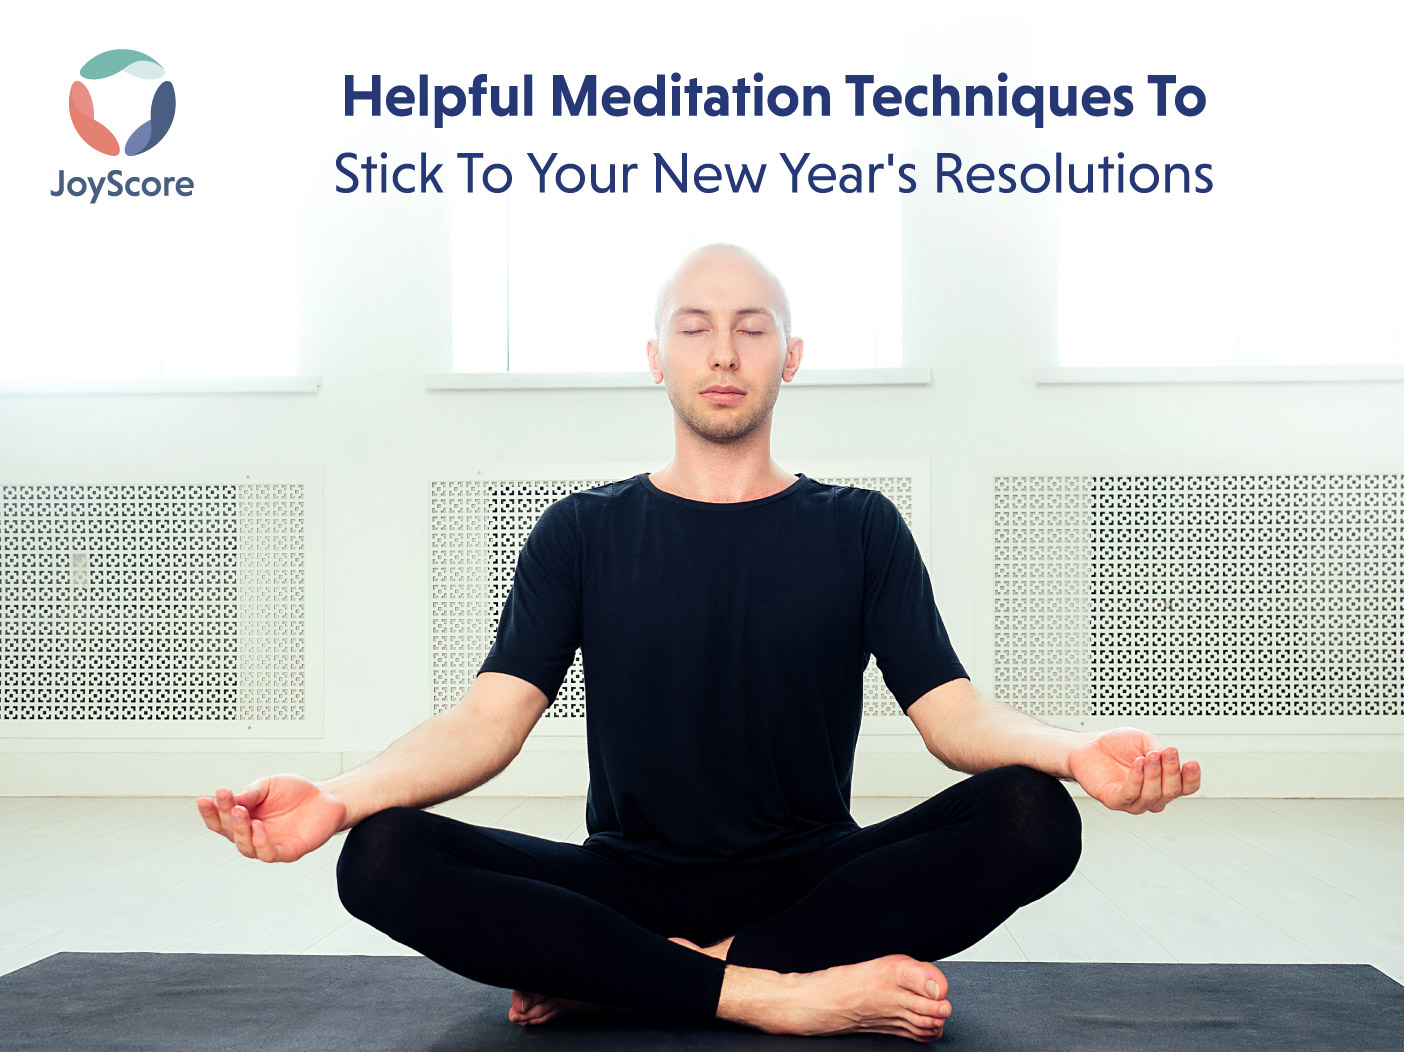 Unlocking Your Best Self: Meditation Techniques to Help You Stick to Your New Year’s Resolutions